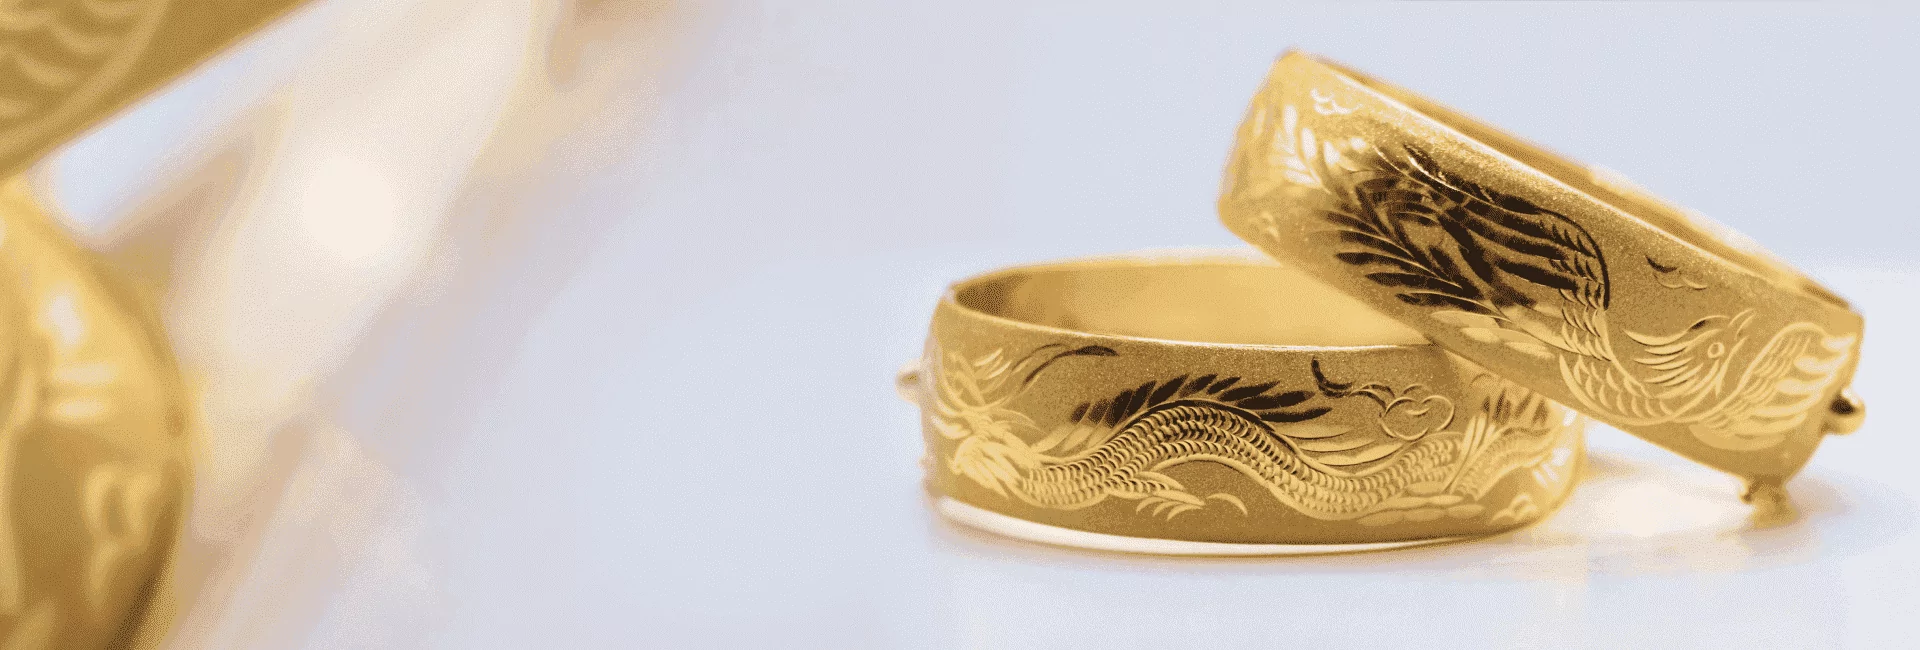 Explore our gold wedding rings to reflect your love story